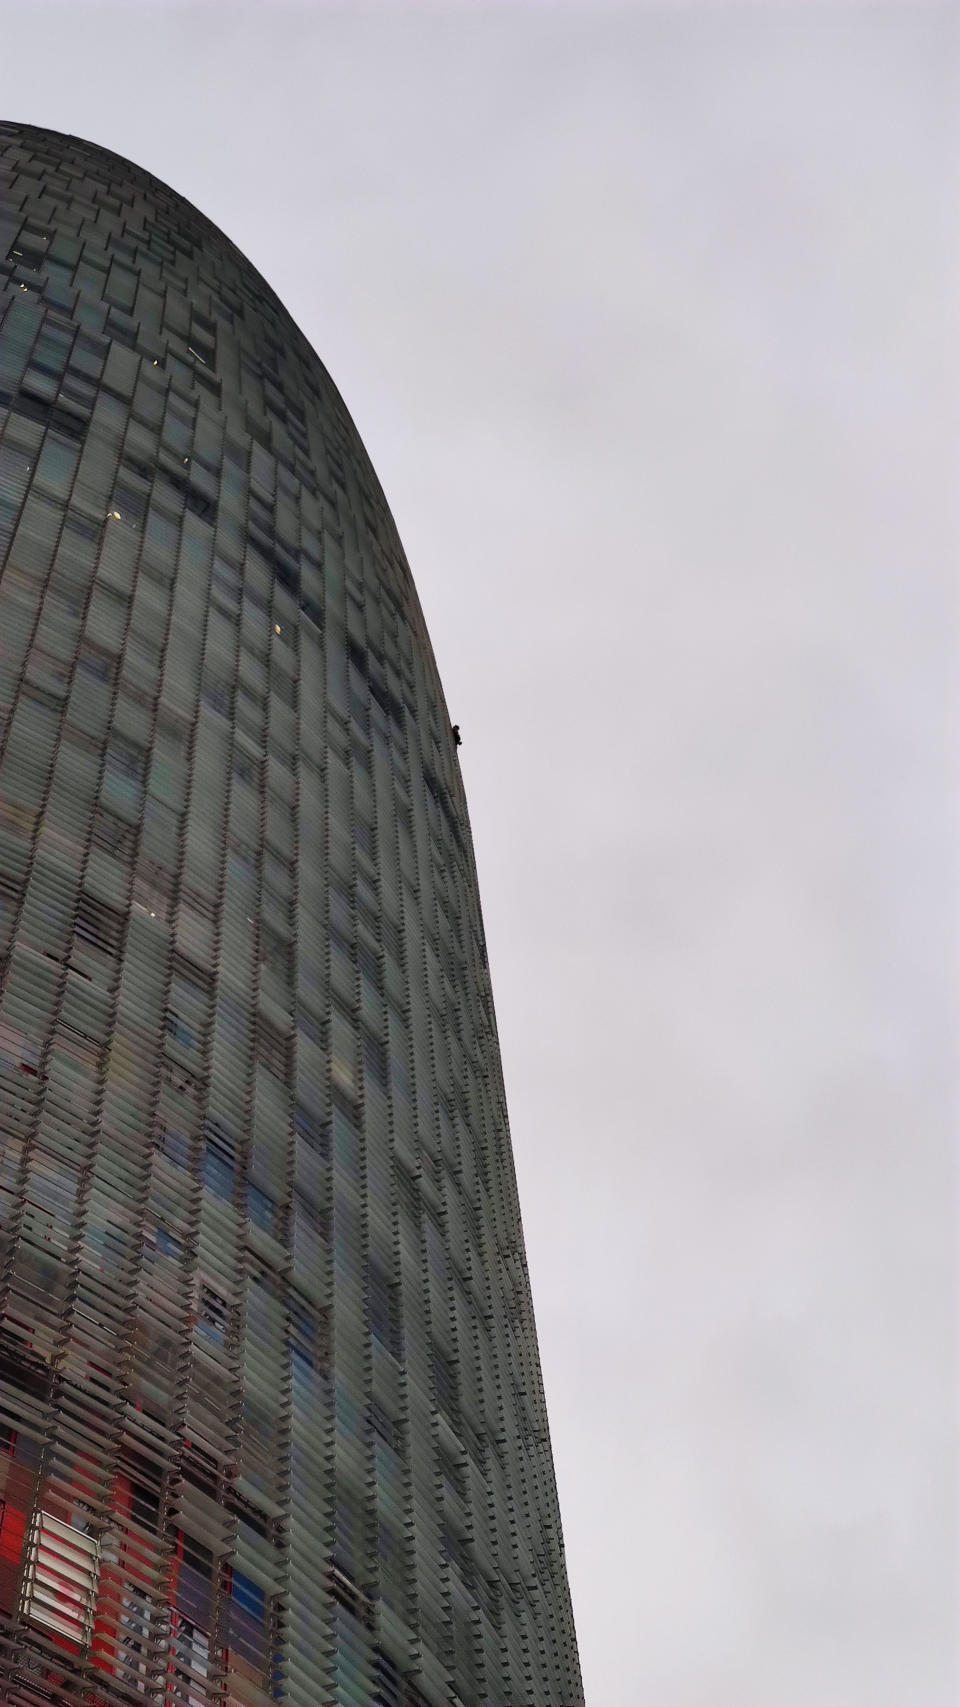 Adam Lockwood, 19, is no stranger to vertigo-inducing free climbing, having been successfully scaling buildings of up to 200 metres in the UK and Europe for the last two years, without any equipment. But his latest venture earlier this week saw Adam add a new challenge to his climbing. For the first time, Adam took on a skyscraper building - the 144-metre (472 feet) Torre Agbar tower in Barcelona, Spain - completely barefoot. The teen, from Manchester, had to keep stopping to rub chalk on his feet to help his grip, as he climbed the ladder-like structure on the outside of the office block.